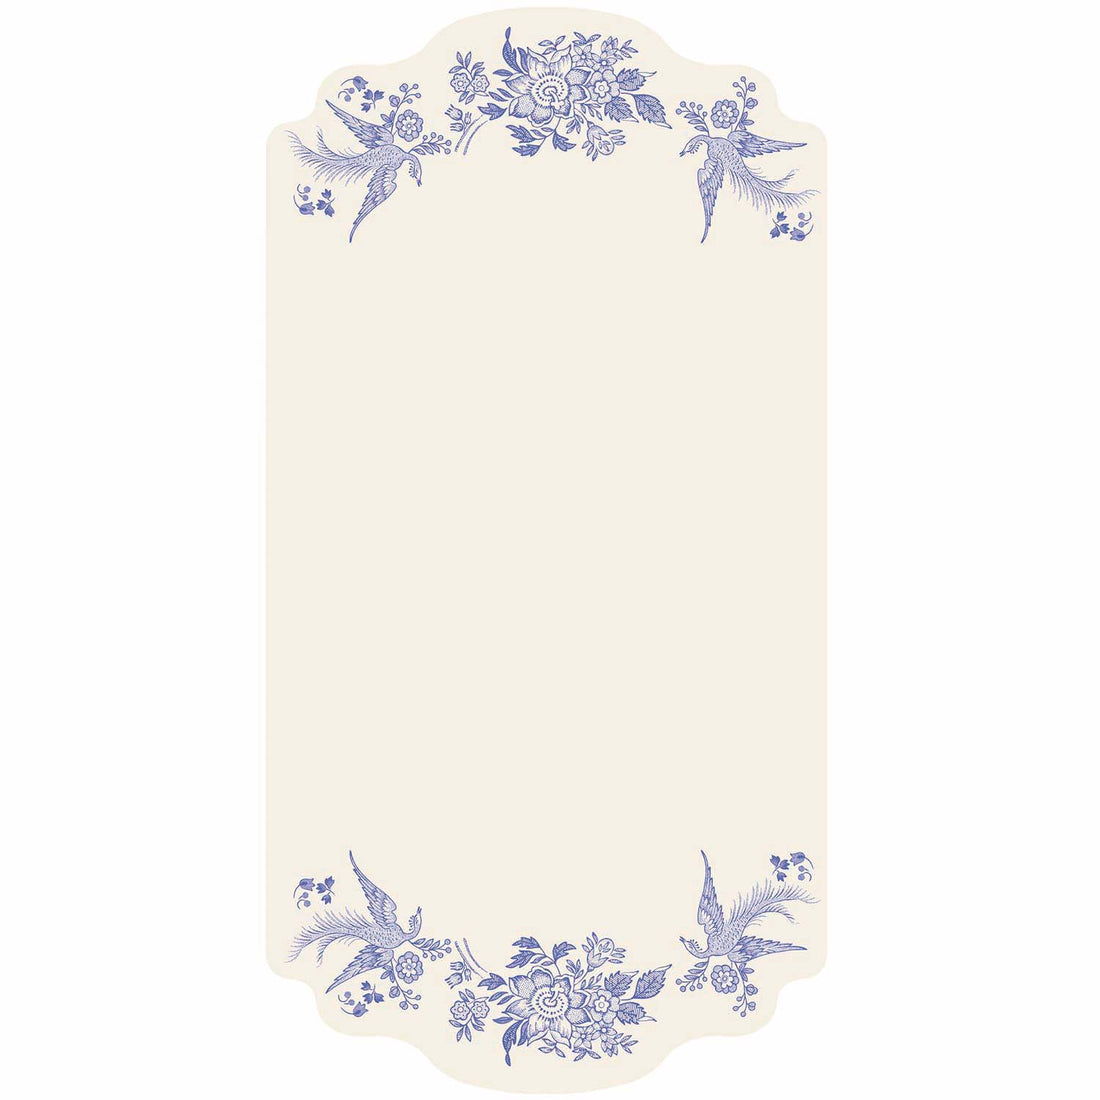 A white rectangular die-cut card featuring a blue vintage Burleigh-style floral and bird design along the top and bottom edges.